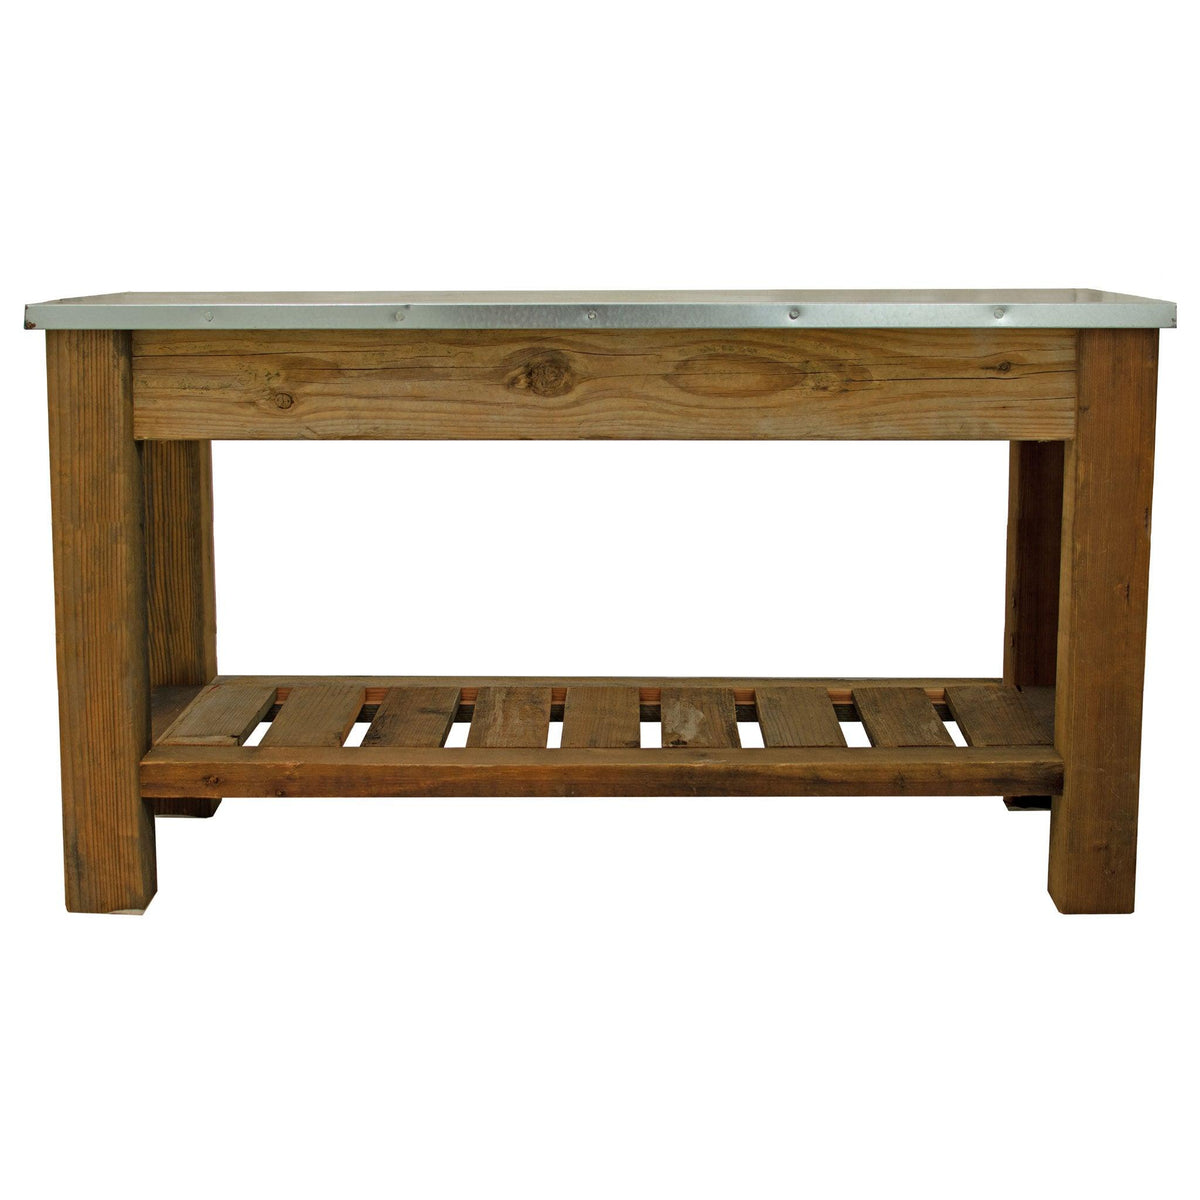 Lee Display's Redwood Outdoor Patio Console Table   Built by Lee Display & Made in the USA.  On sale now at leedisplay.com.  Great for a lightweight Potting Table and Gardening Work Bench.